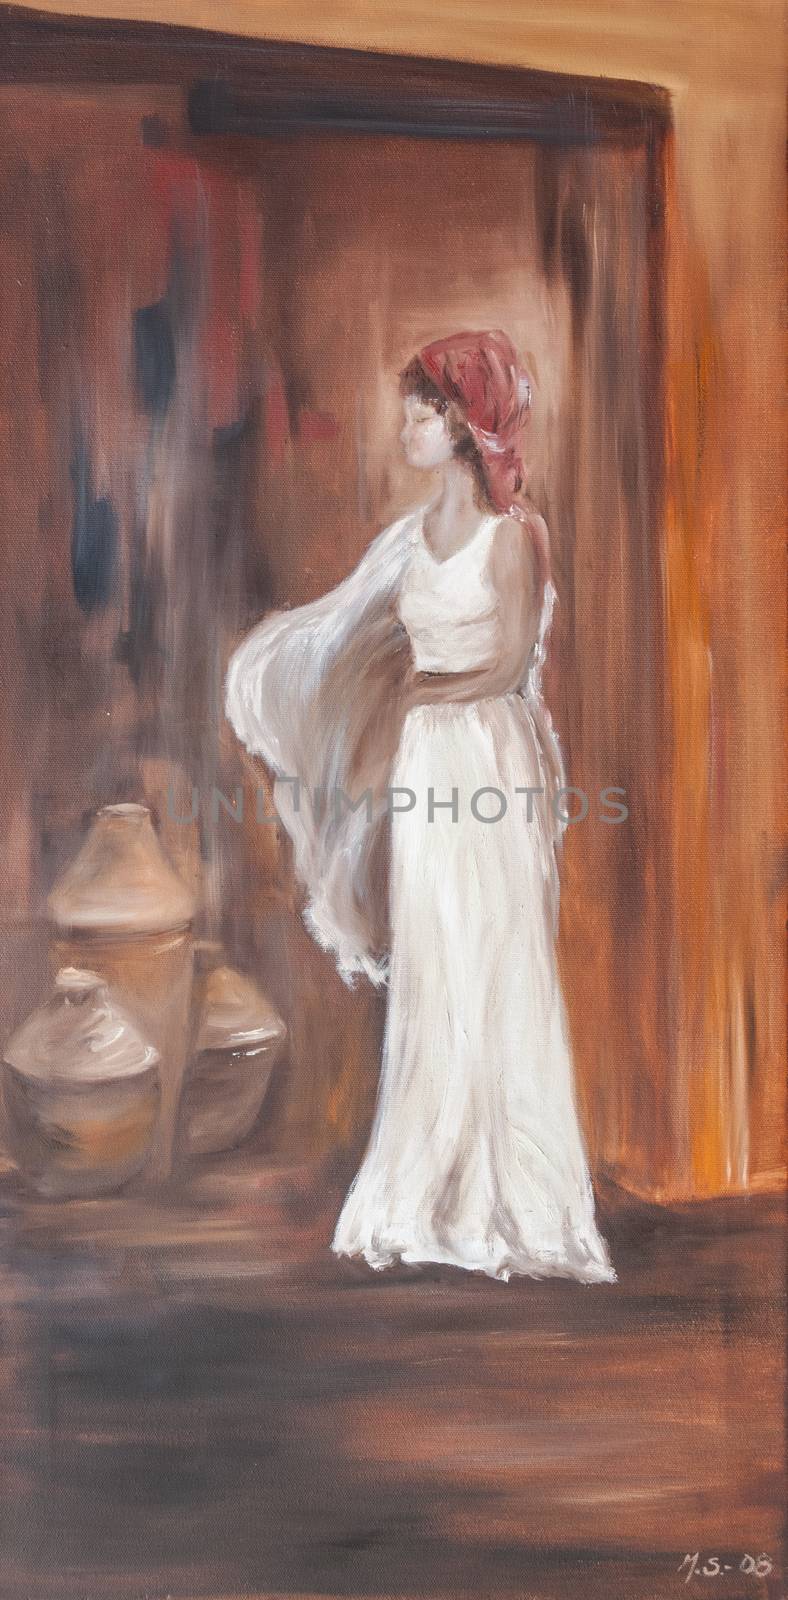 Lady in white dress is posing like a model. Figurative oil painting art on canvas